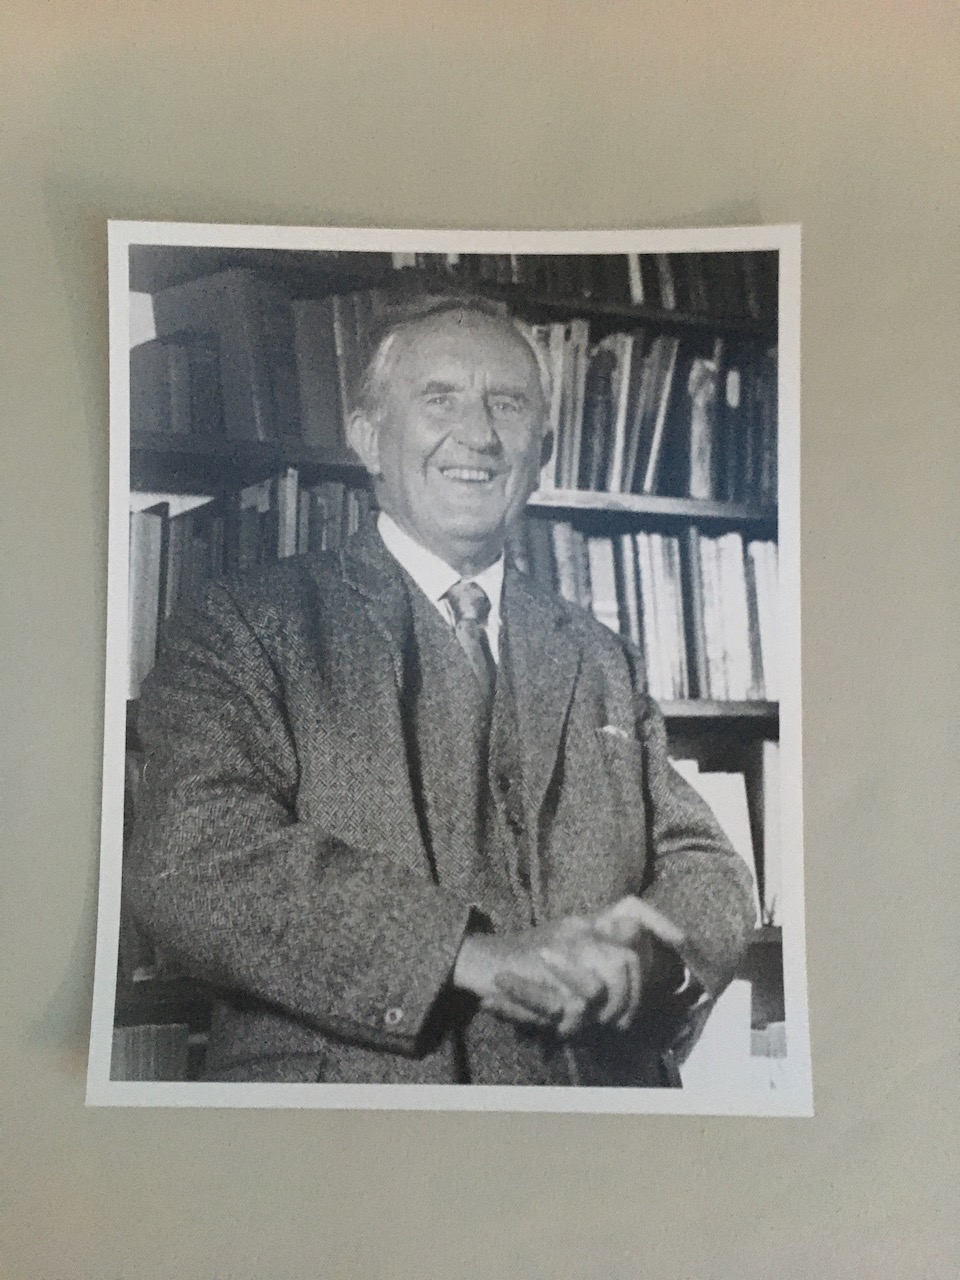 Exclusive Photographic Print: J.R.R. Tolkien, captured mid-laughter in his personal library